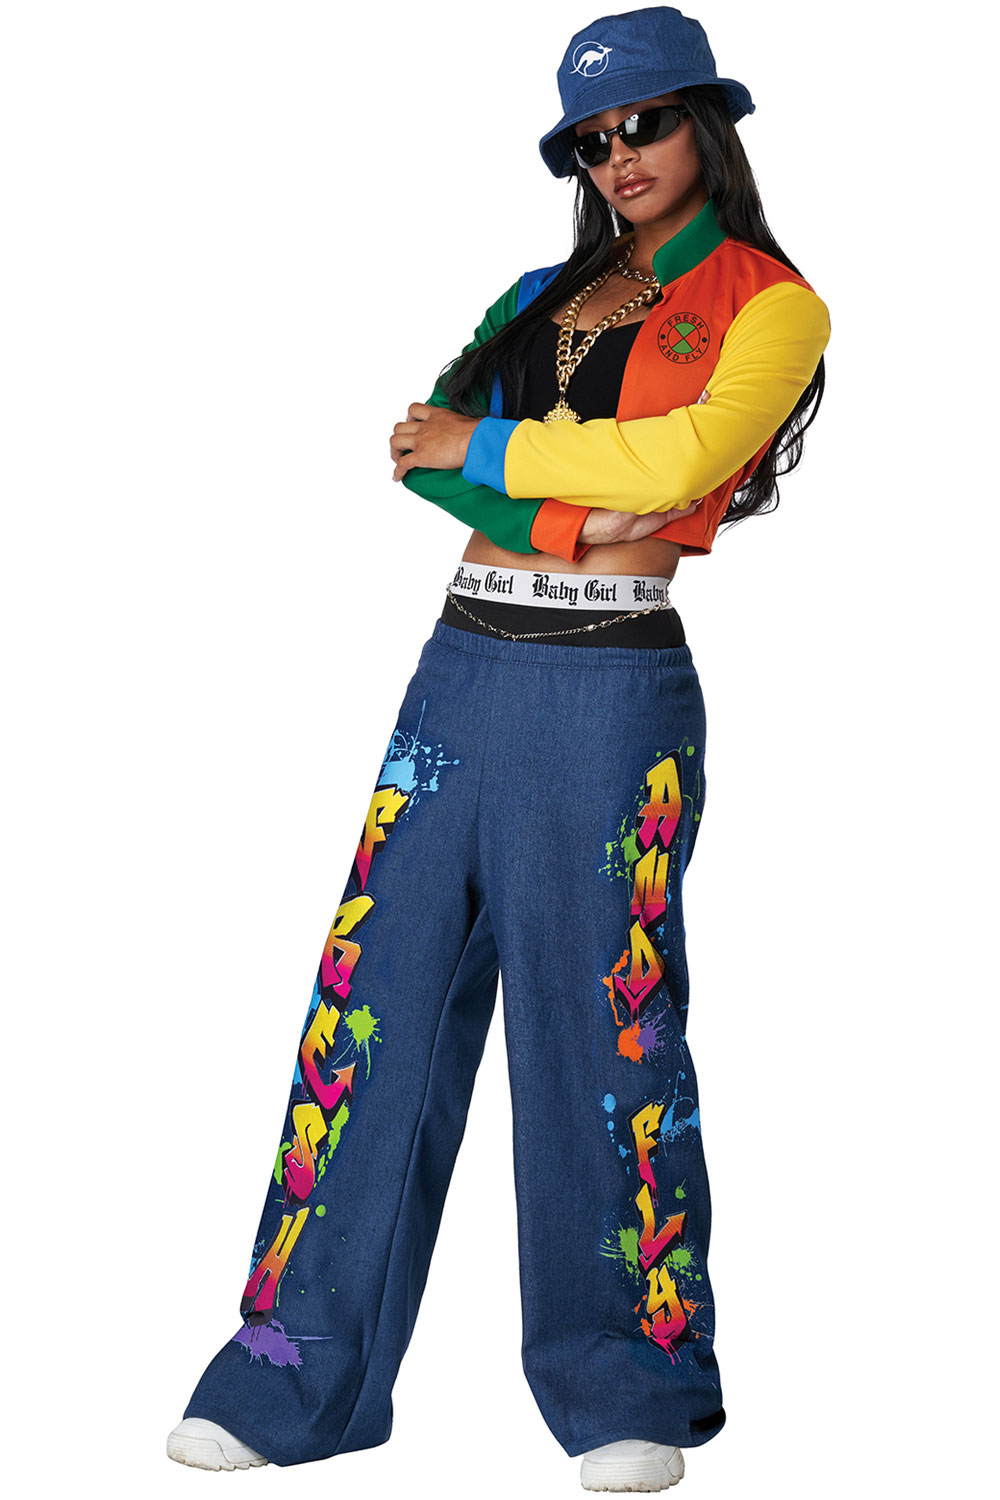 90s hip hop outfits for women